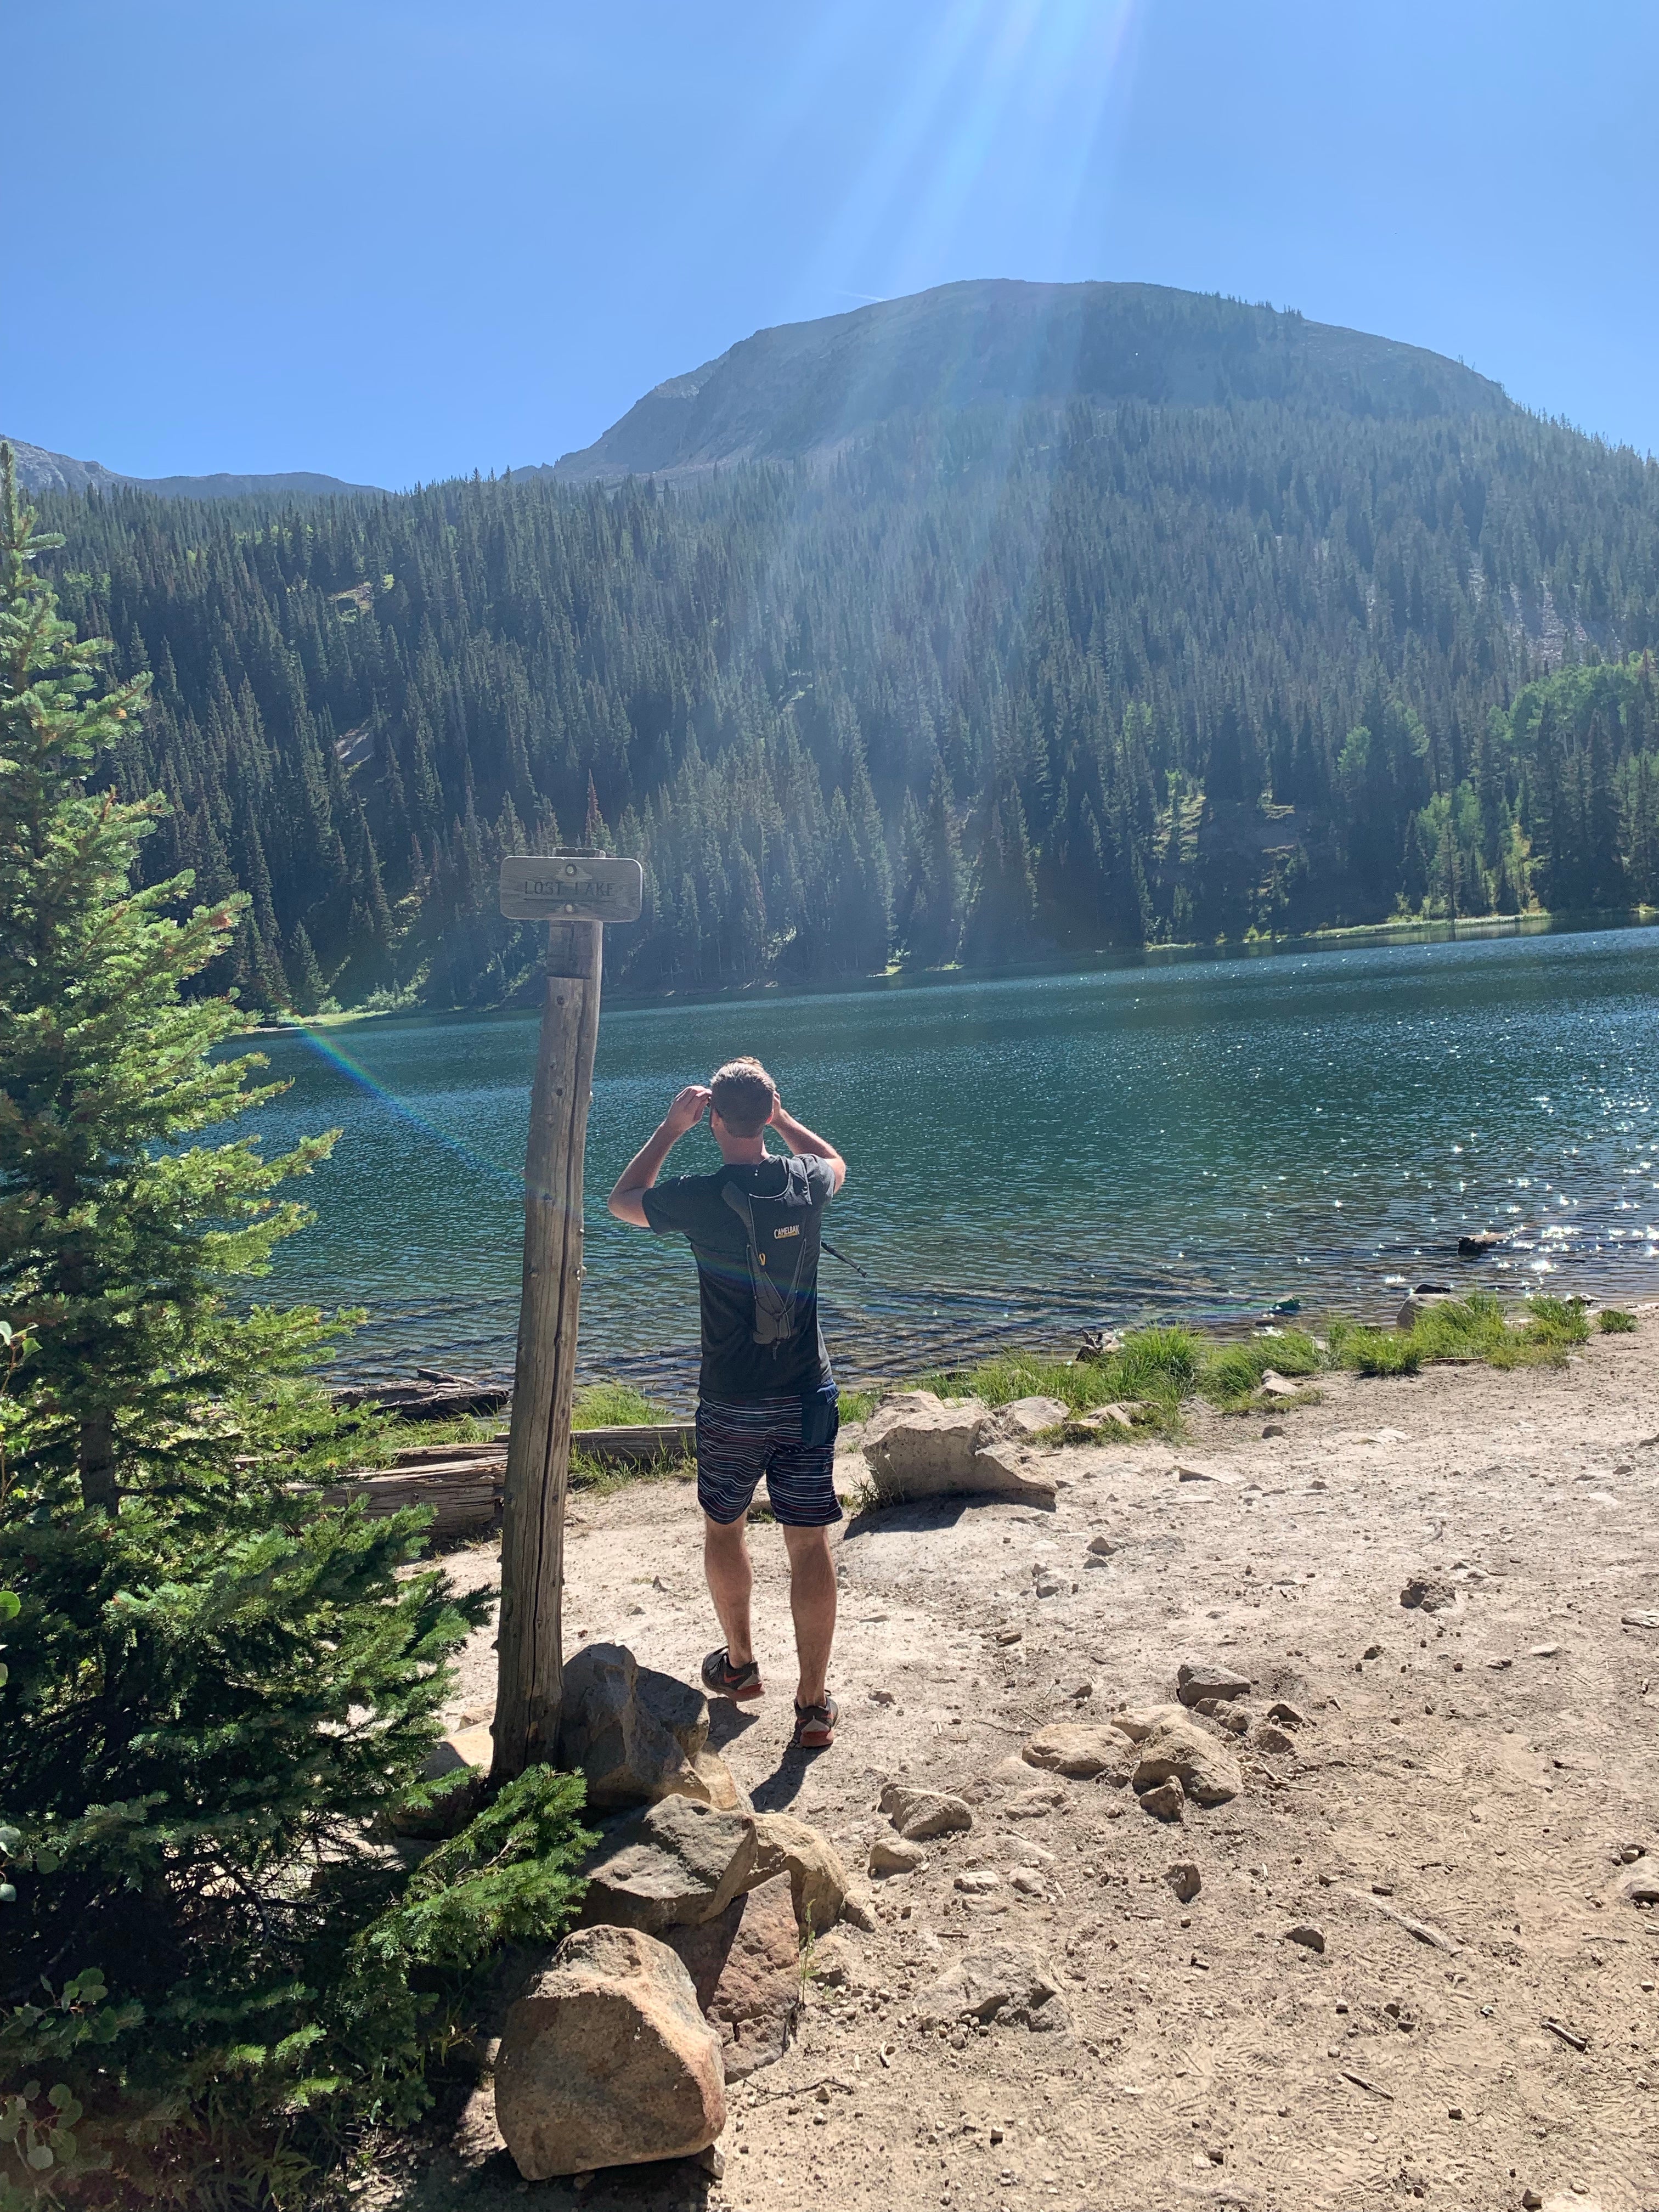 Lost lake is a 30 minute moderate hike away.